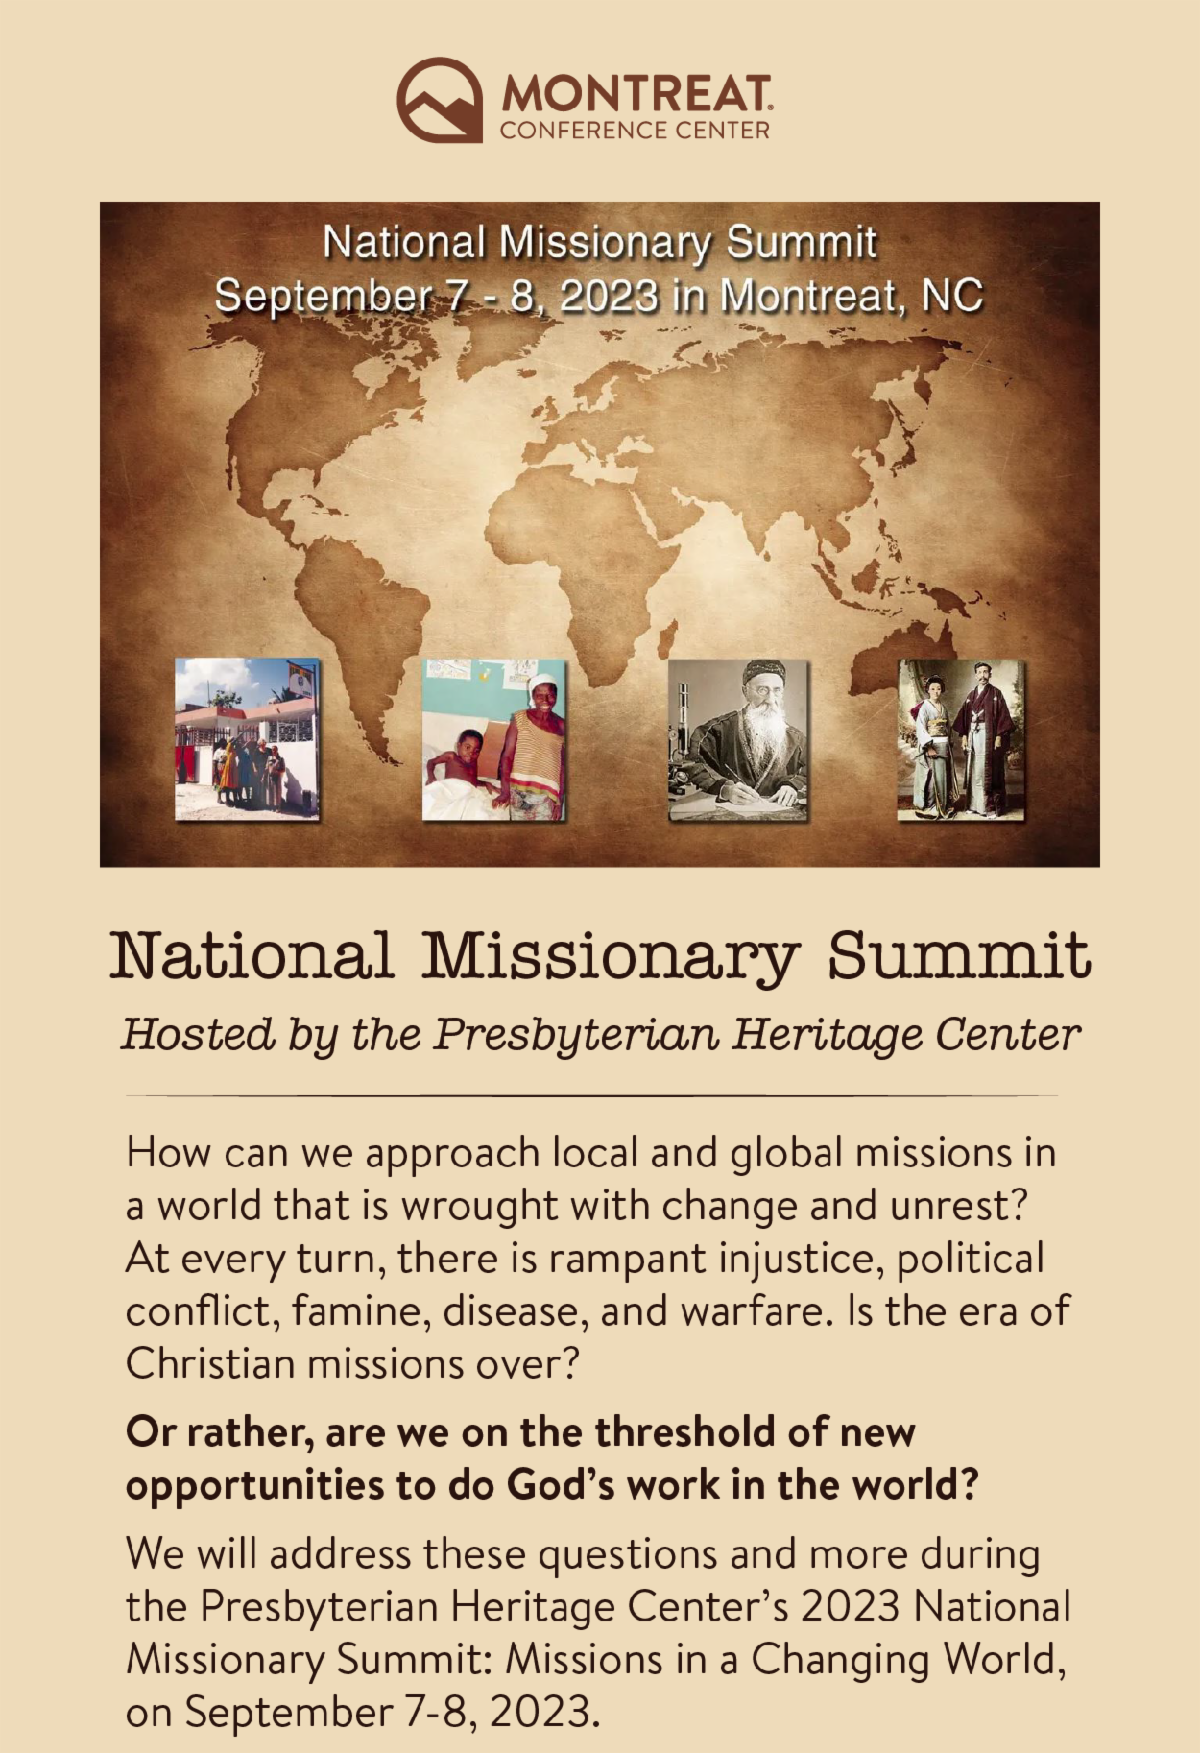 National Missionary Summit: Hosted by the Presbyterian Heritage Center - How can we approach local and global missions in a world that is wrought with change and unrest? At every turn, there is rampant injustice, political conflict, famine, disease, and warfare. Is the era of Christian missions over? Or rather, are we on the threshold of new opportunities to do God’s work in the world? We will address these questions and more during the Presbyterian Heritage Center’s 2023 National Missionary Summit: Missions in a Changing World, on September 7-8, 2023. 